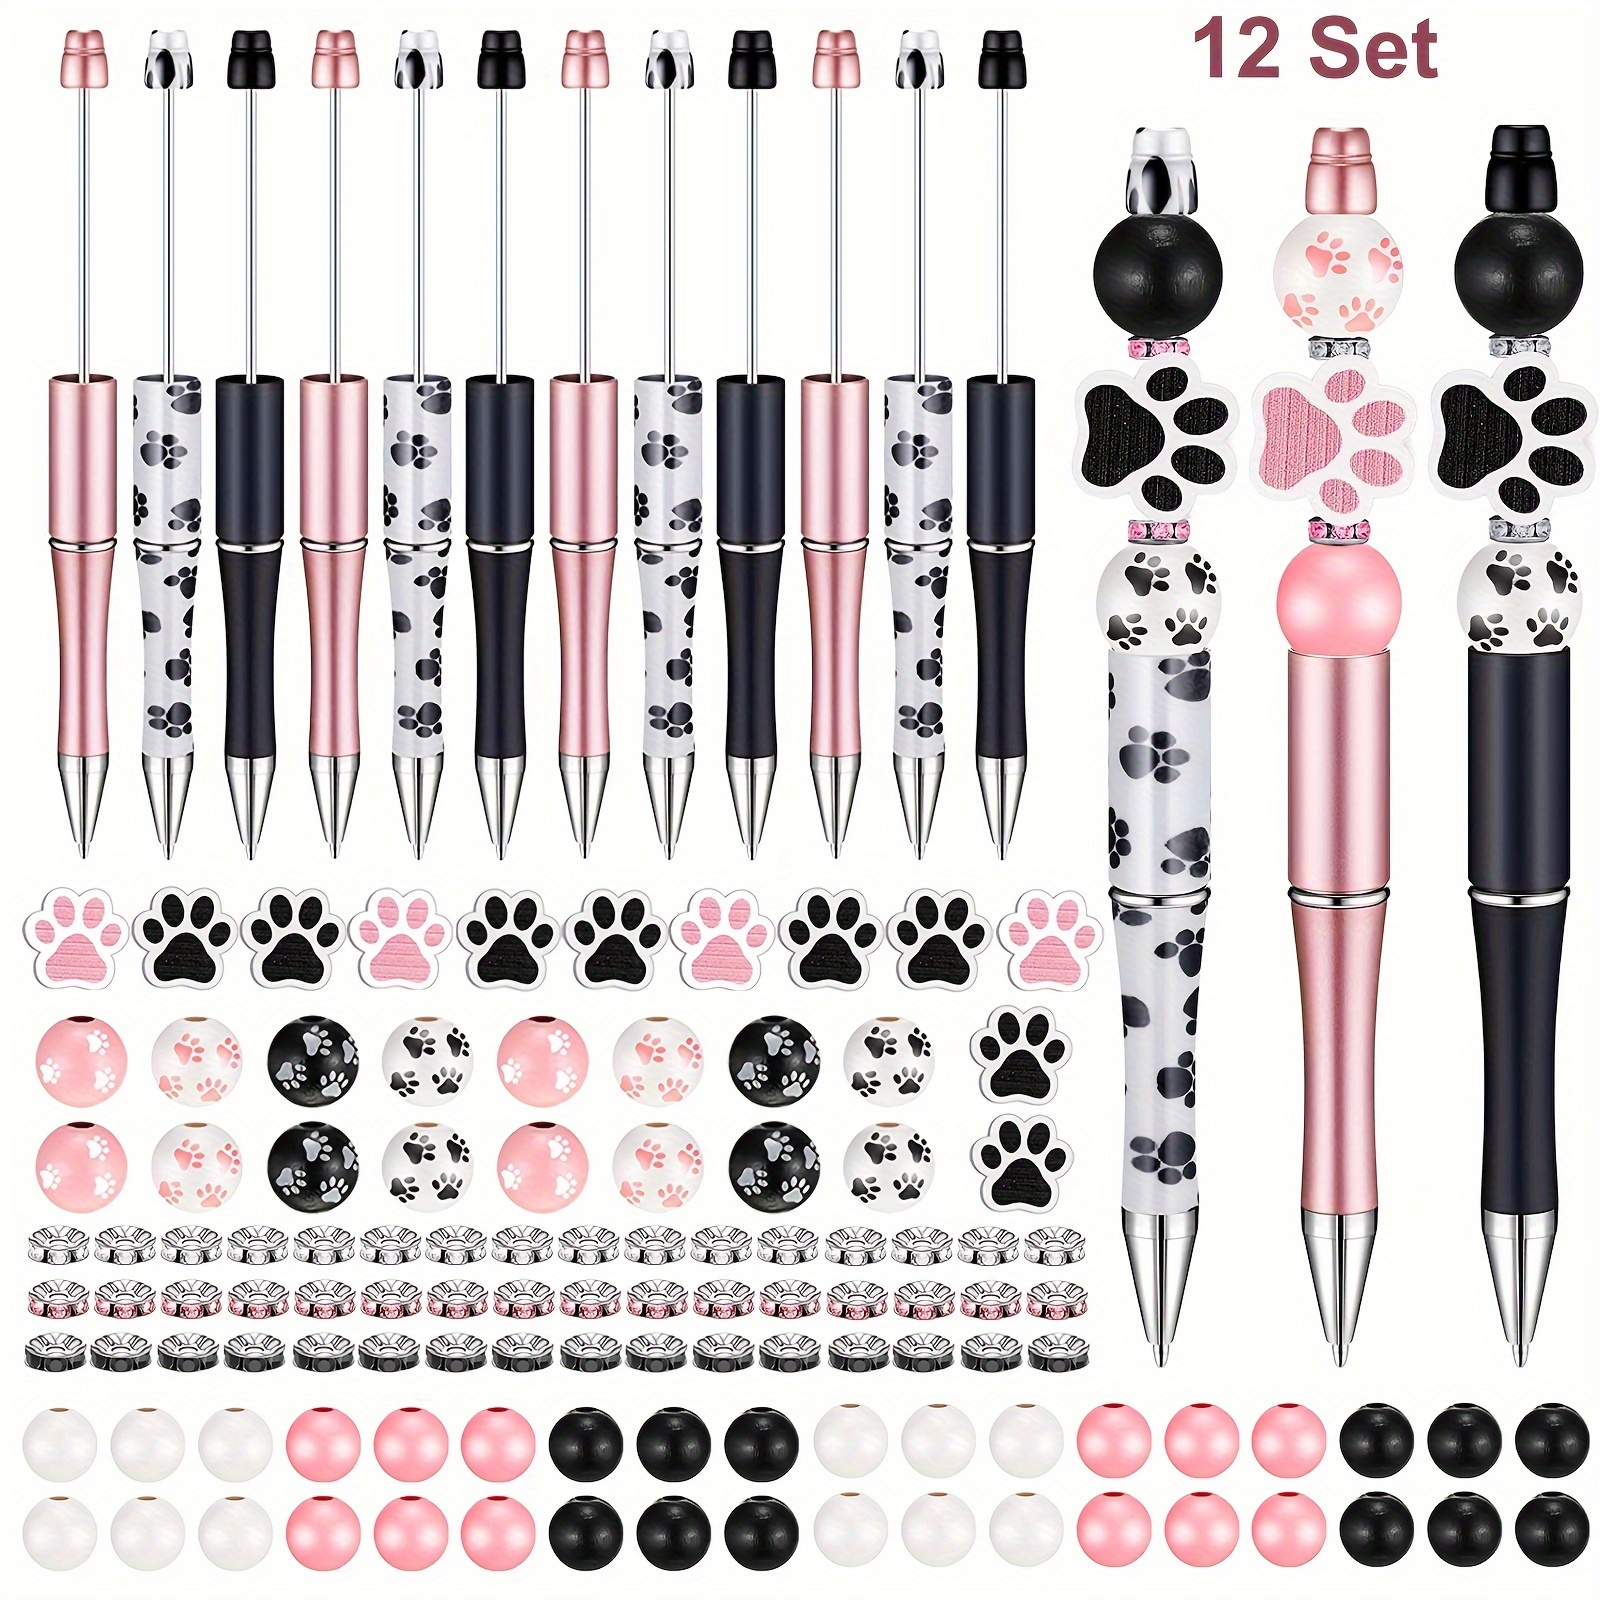 

12 Set Dog Paw Diy Beadable Pens Bulk, Assorted Bead Pens Wood Beads Crystal Spacer Beads Set With Plastic Black Ink Ballpoint Pen Diy Beaded Pen Set For School Office Party Supplies Art Craft Gift